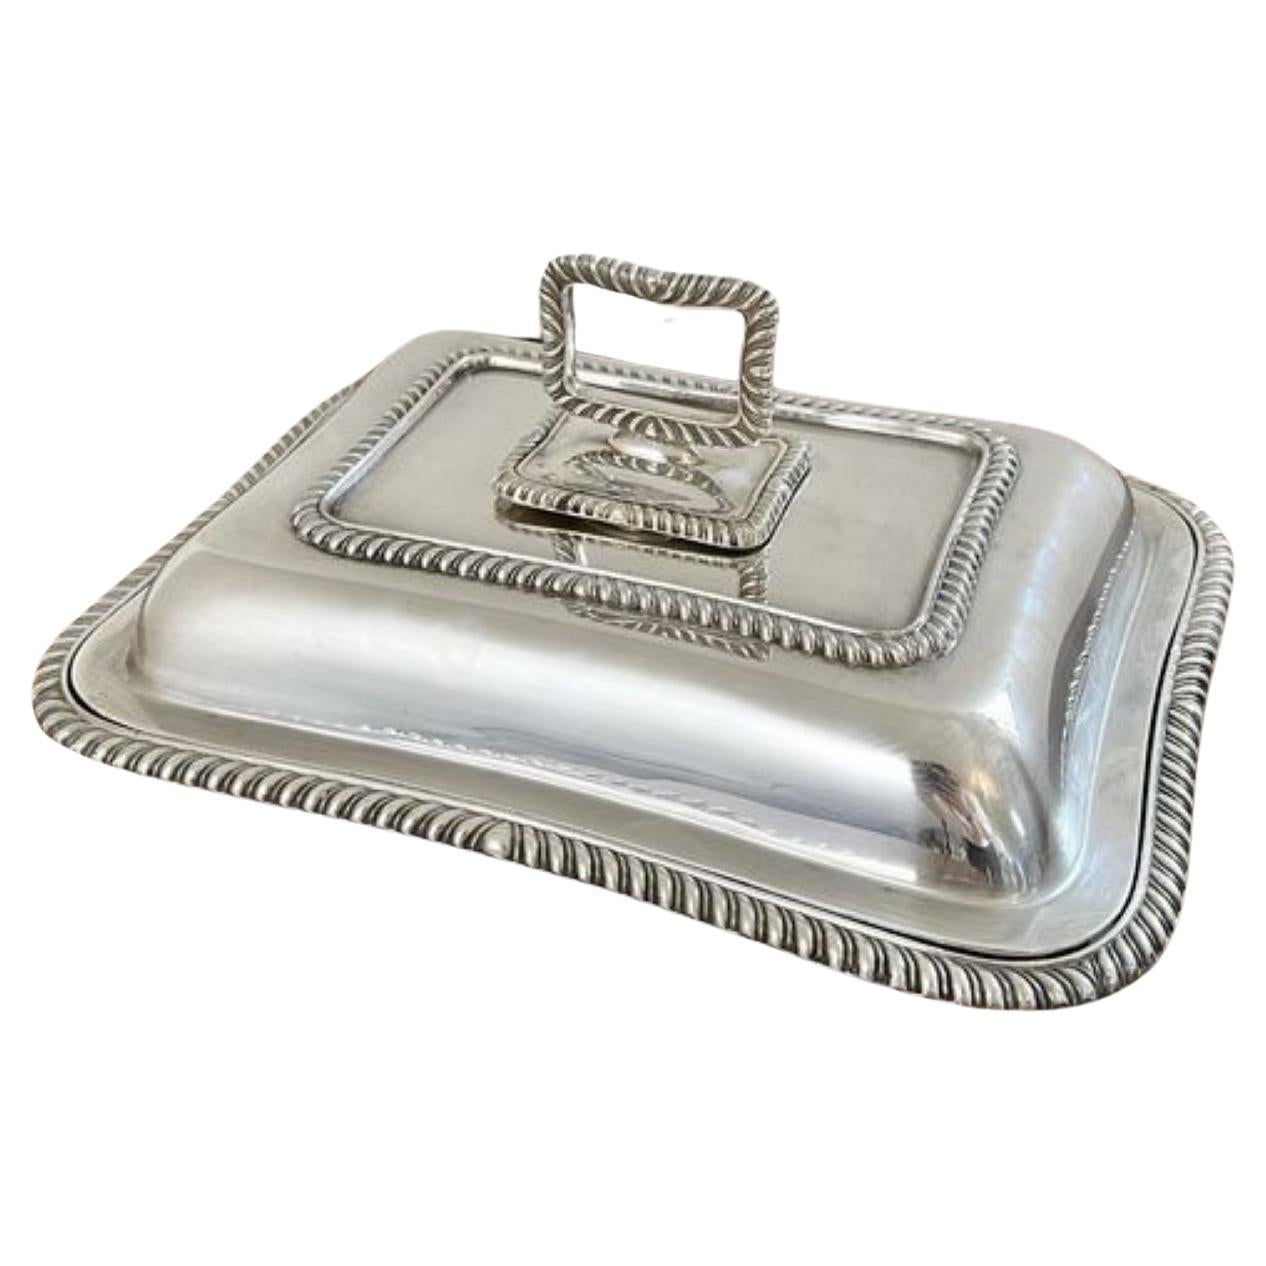 Stunning antique Edwardian quality silver plated rectangle entrée dish For Sale